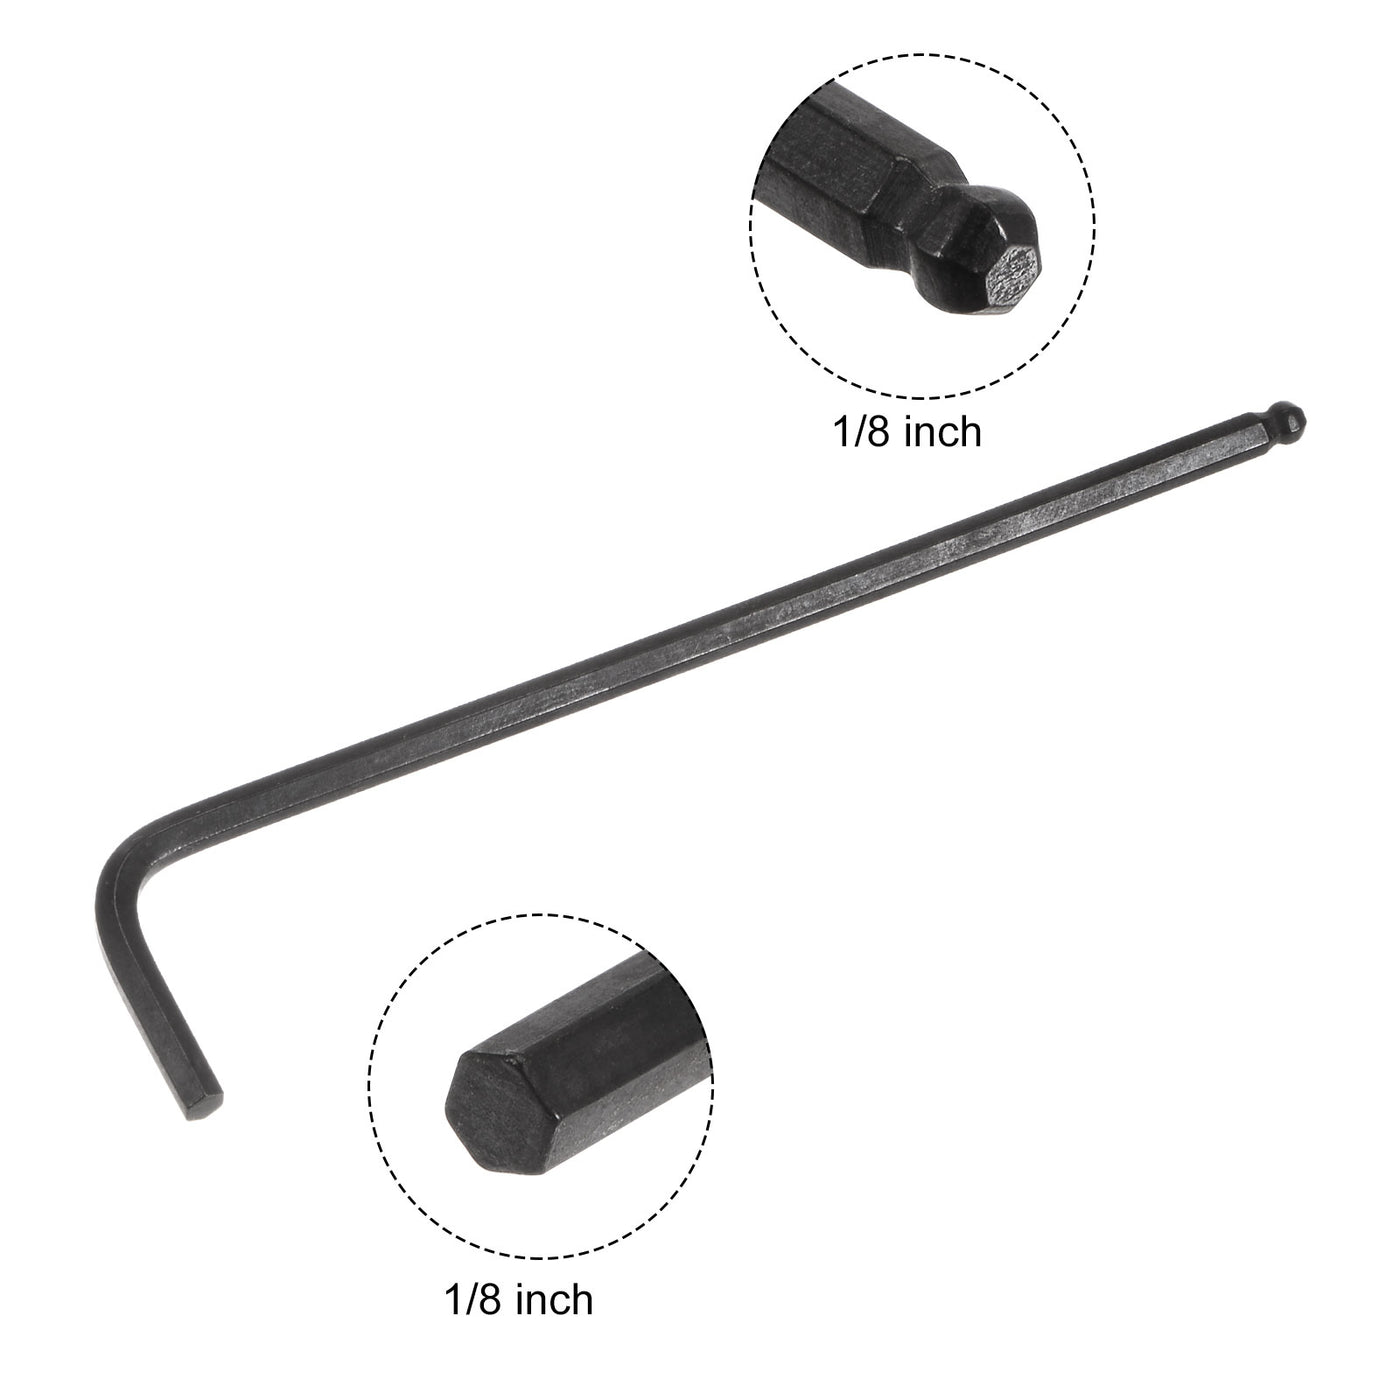 uxcell Uxcell 1/8" Ball End Hex Key Wrench, L Shaped Long Arm CR-V Repairing Tool, Black